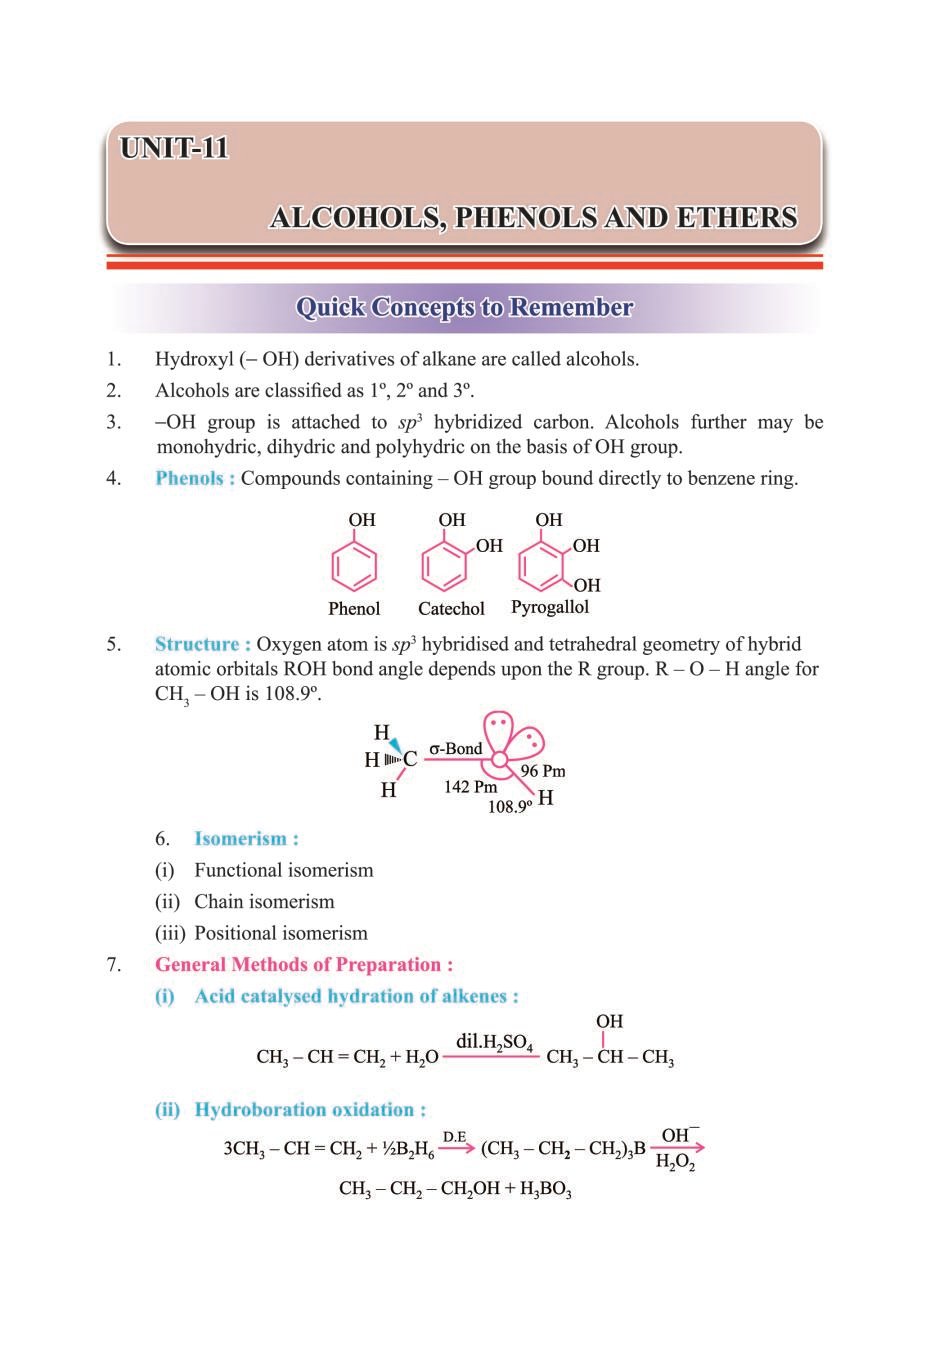 Chemistry alcohols phenols and ethers notes forex trading uk football pool